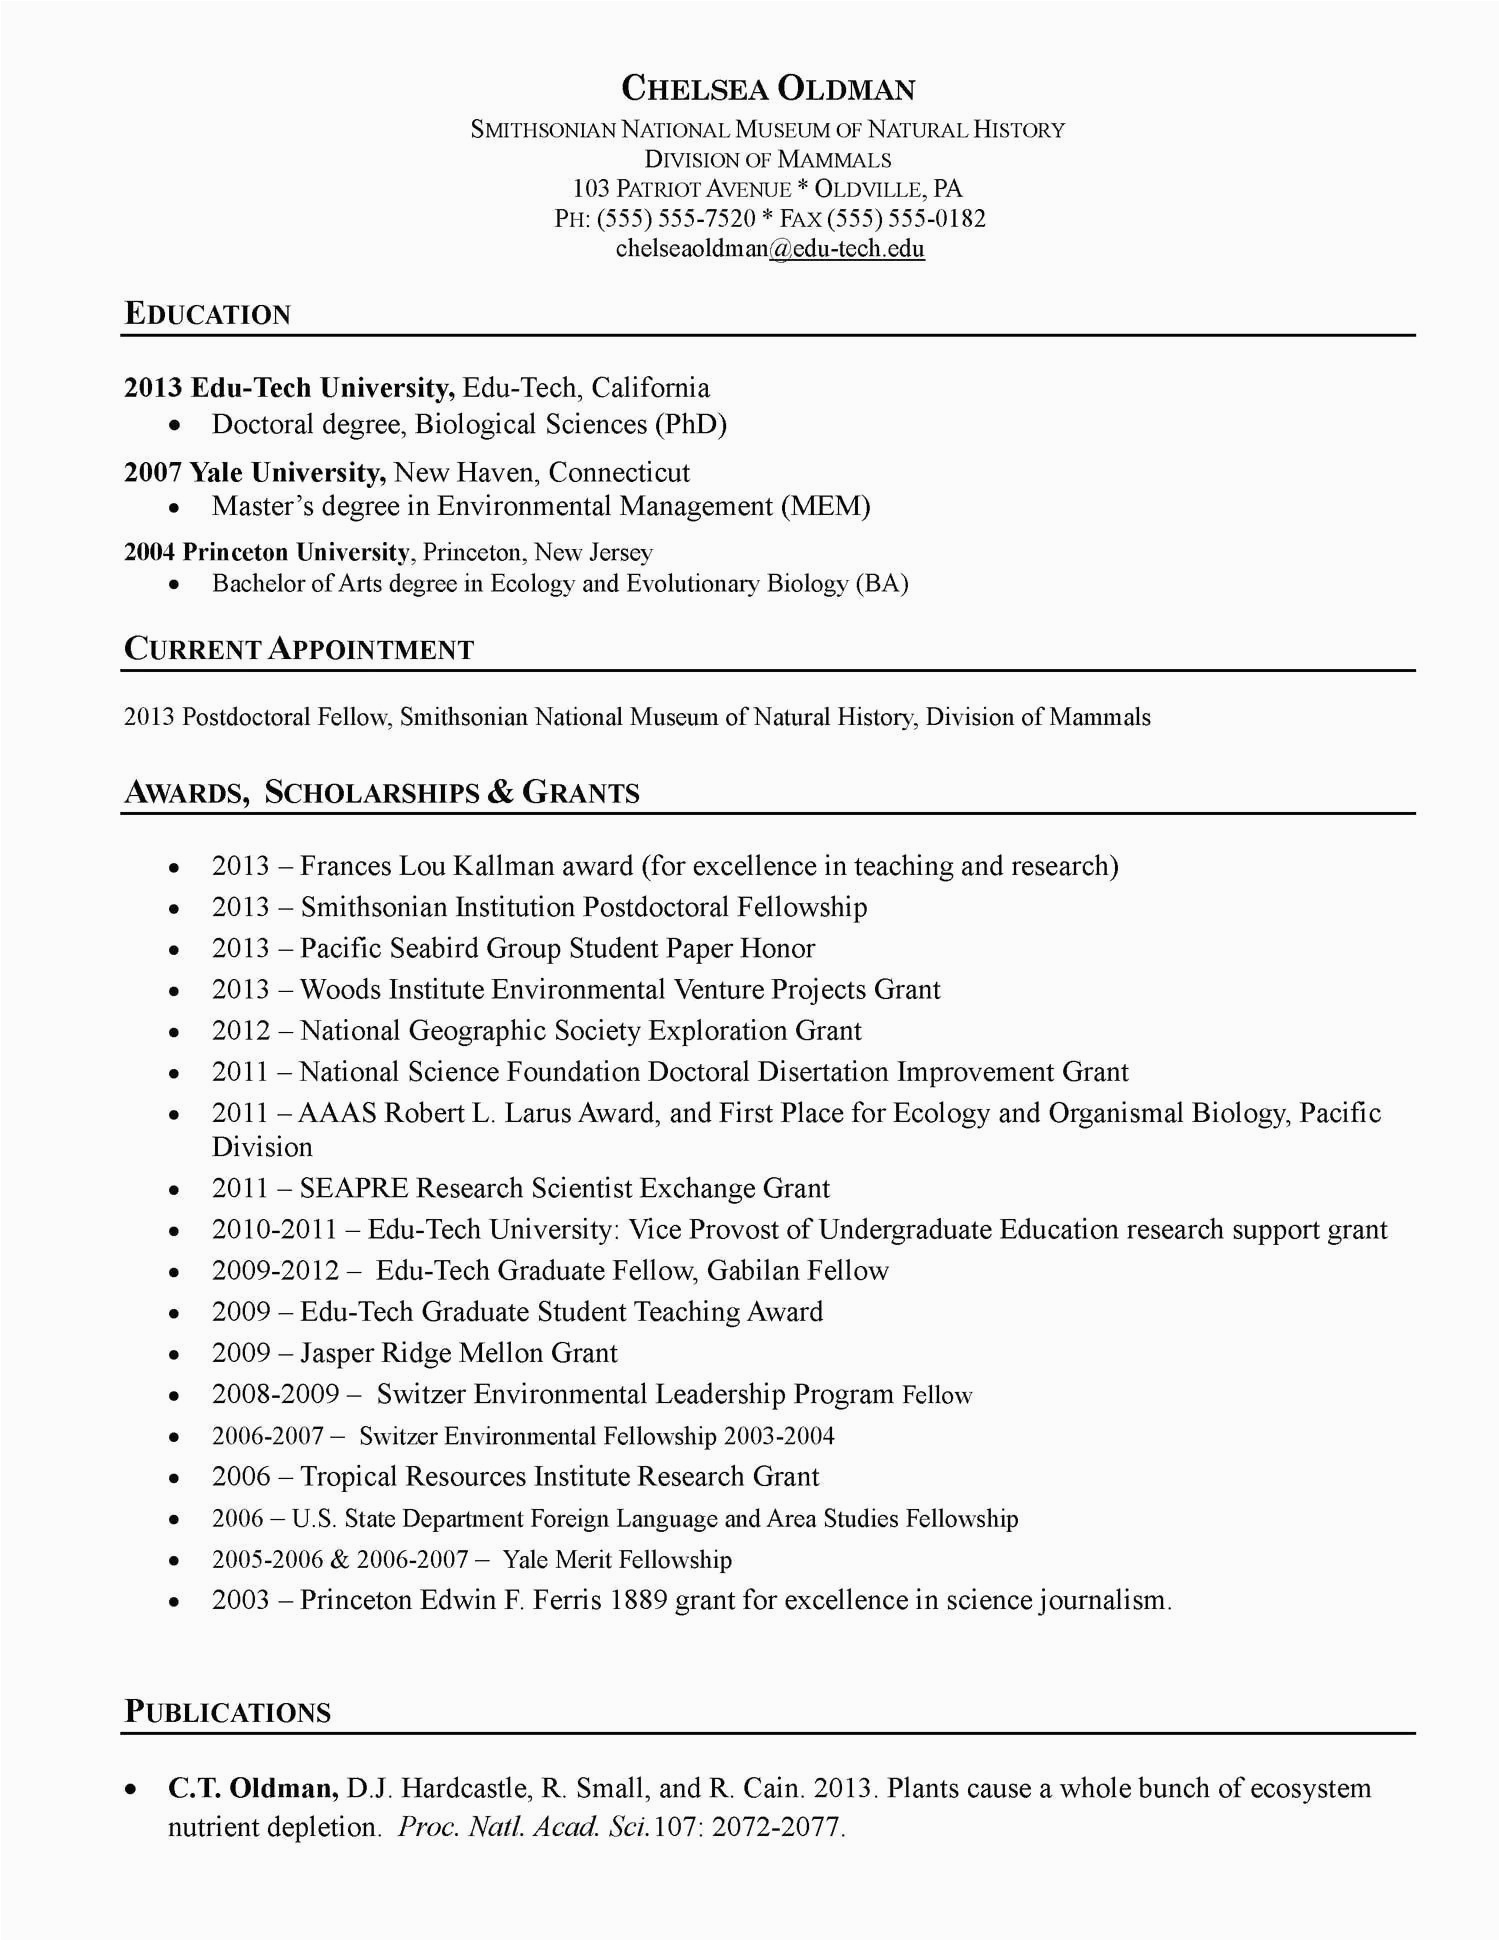 Resume Template for Applying to Graduate School Current Graduate Student Resume Best Resume Examples